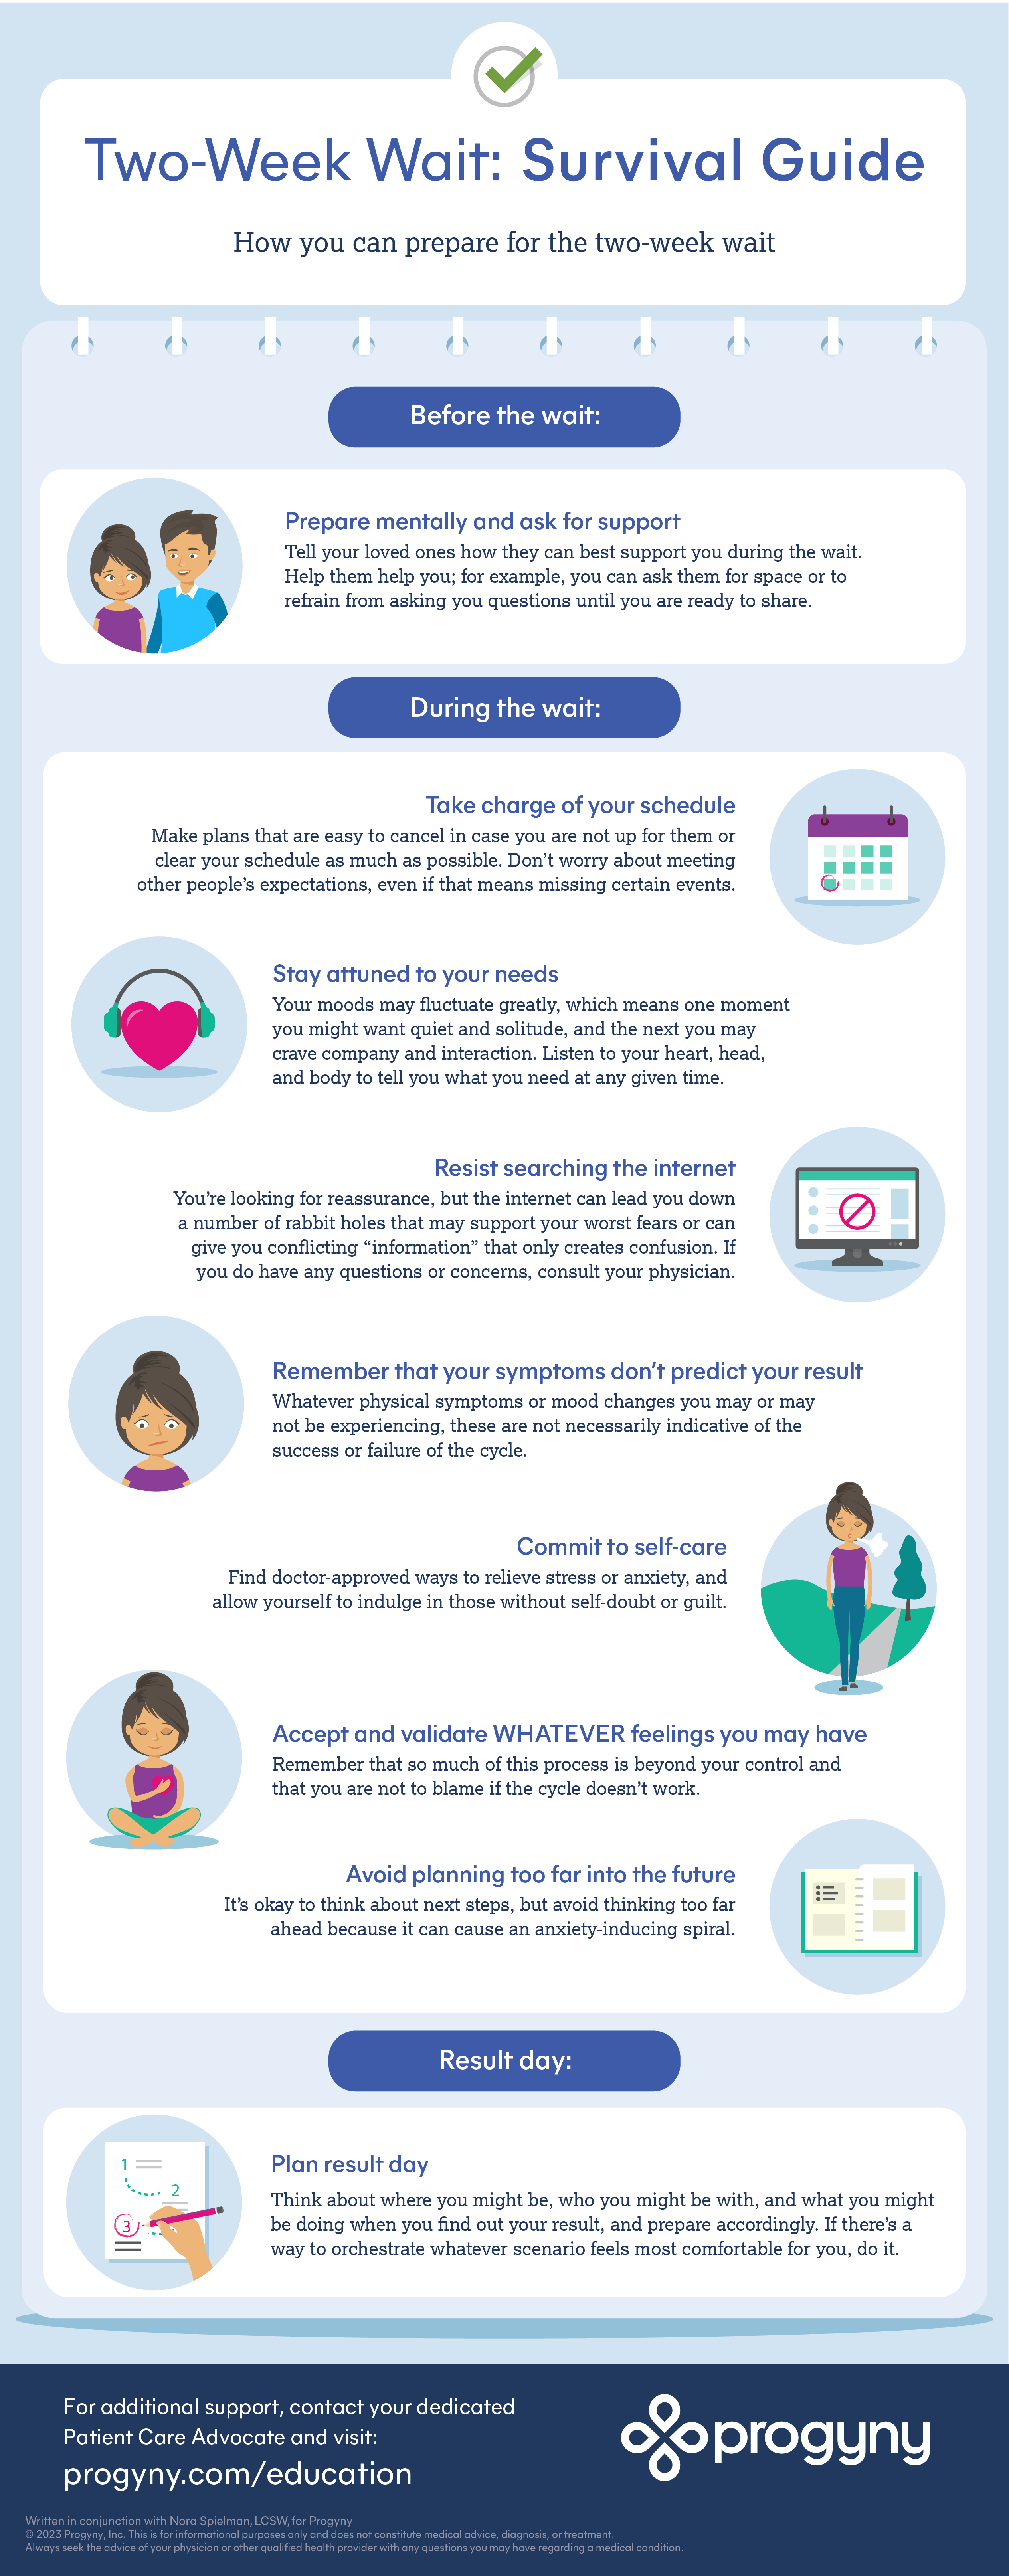 Two-week wait survival guide - An illustrated infographic with tips on how to mentally and emotionally prepare for the plan result day